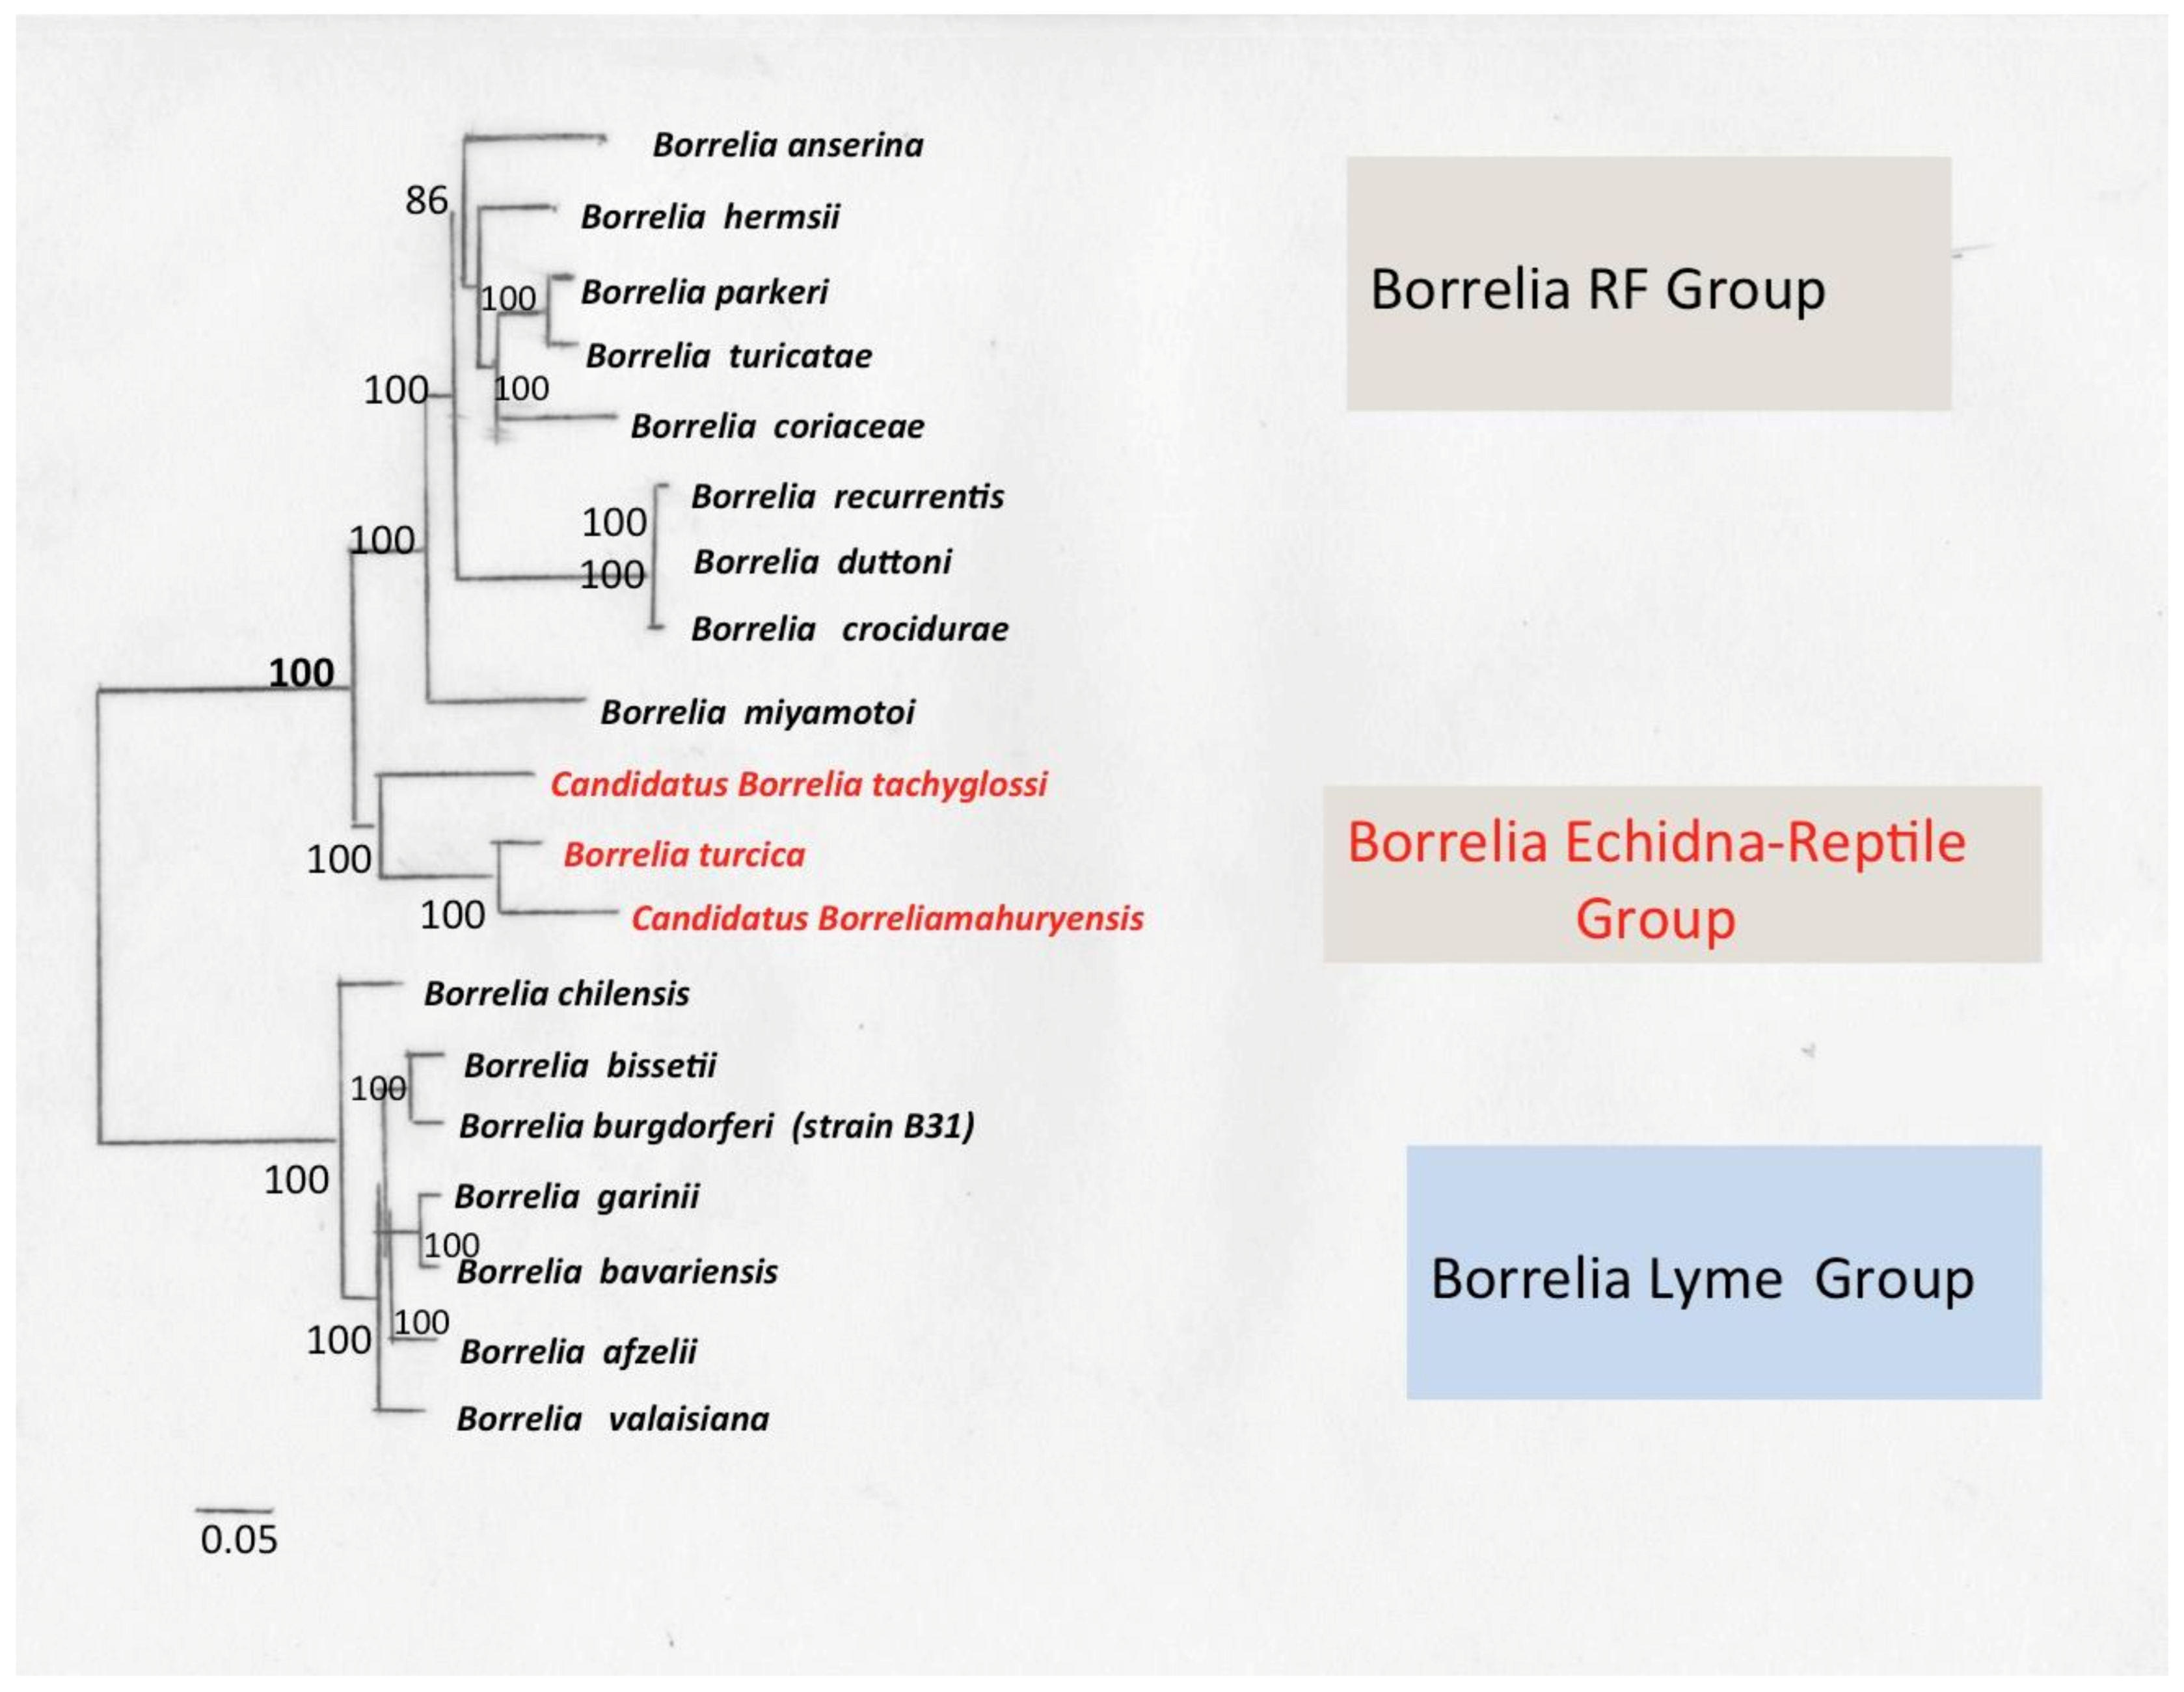 Biology Free Full-Text Borreliae Part 1 Borrelia Lyme Group and Echidna-Reptile Group image pic